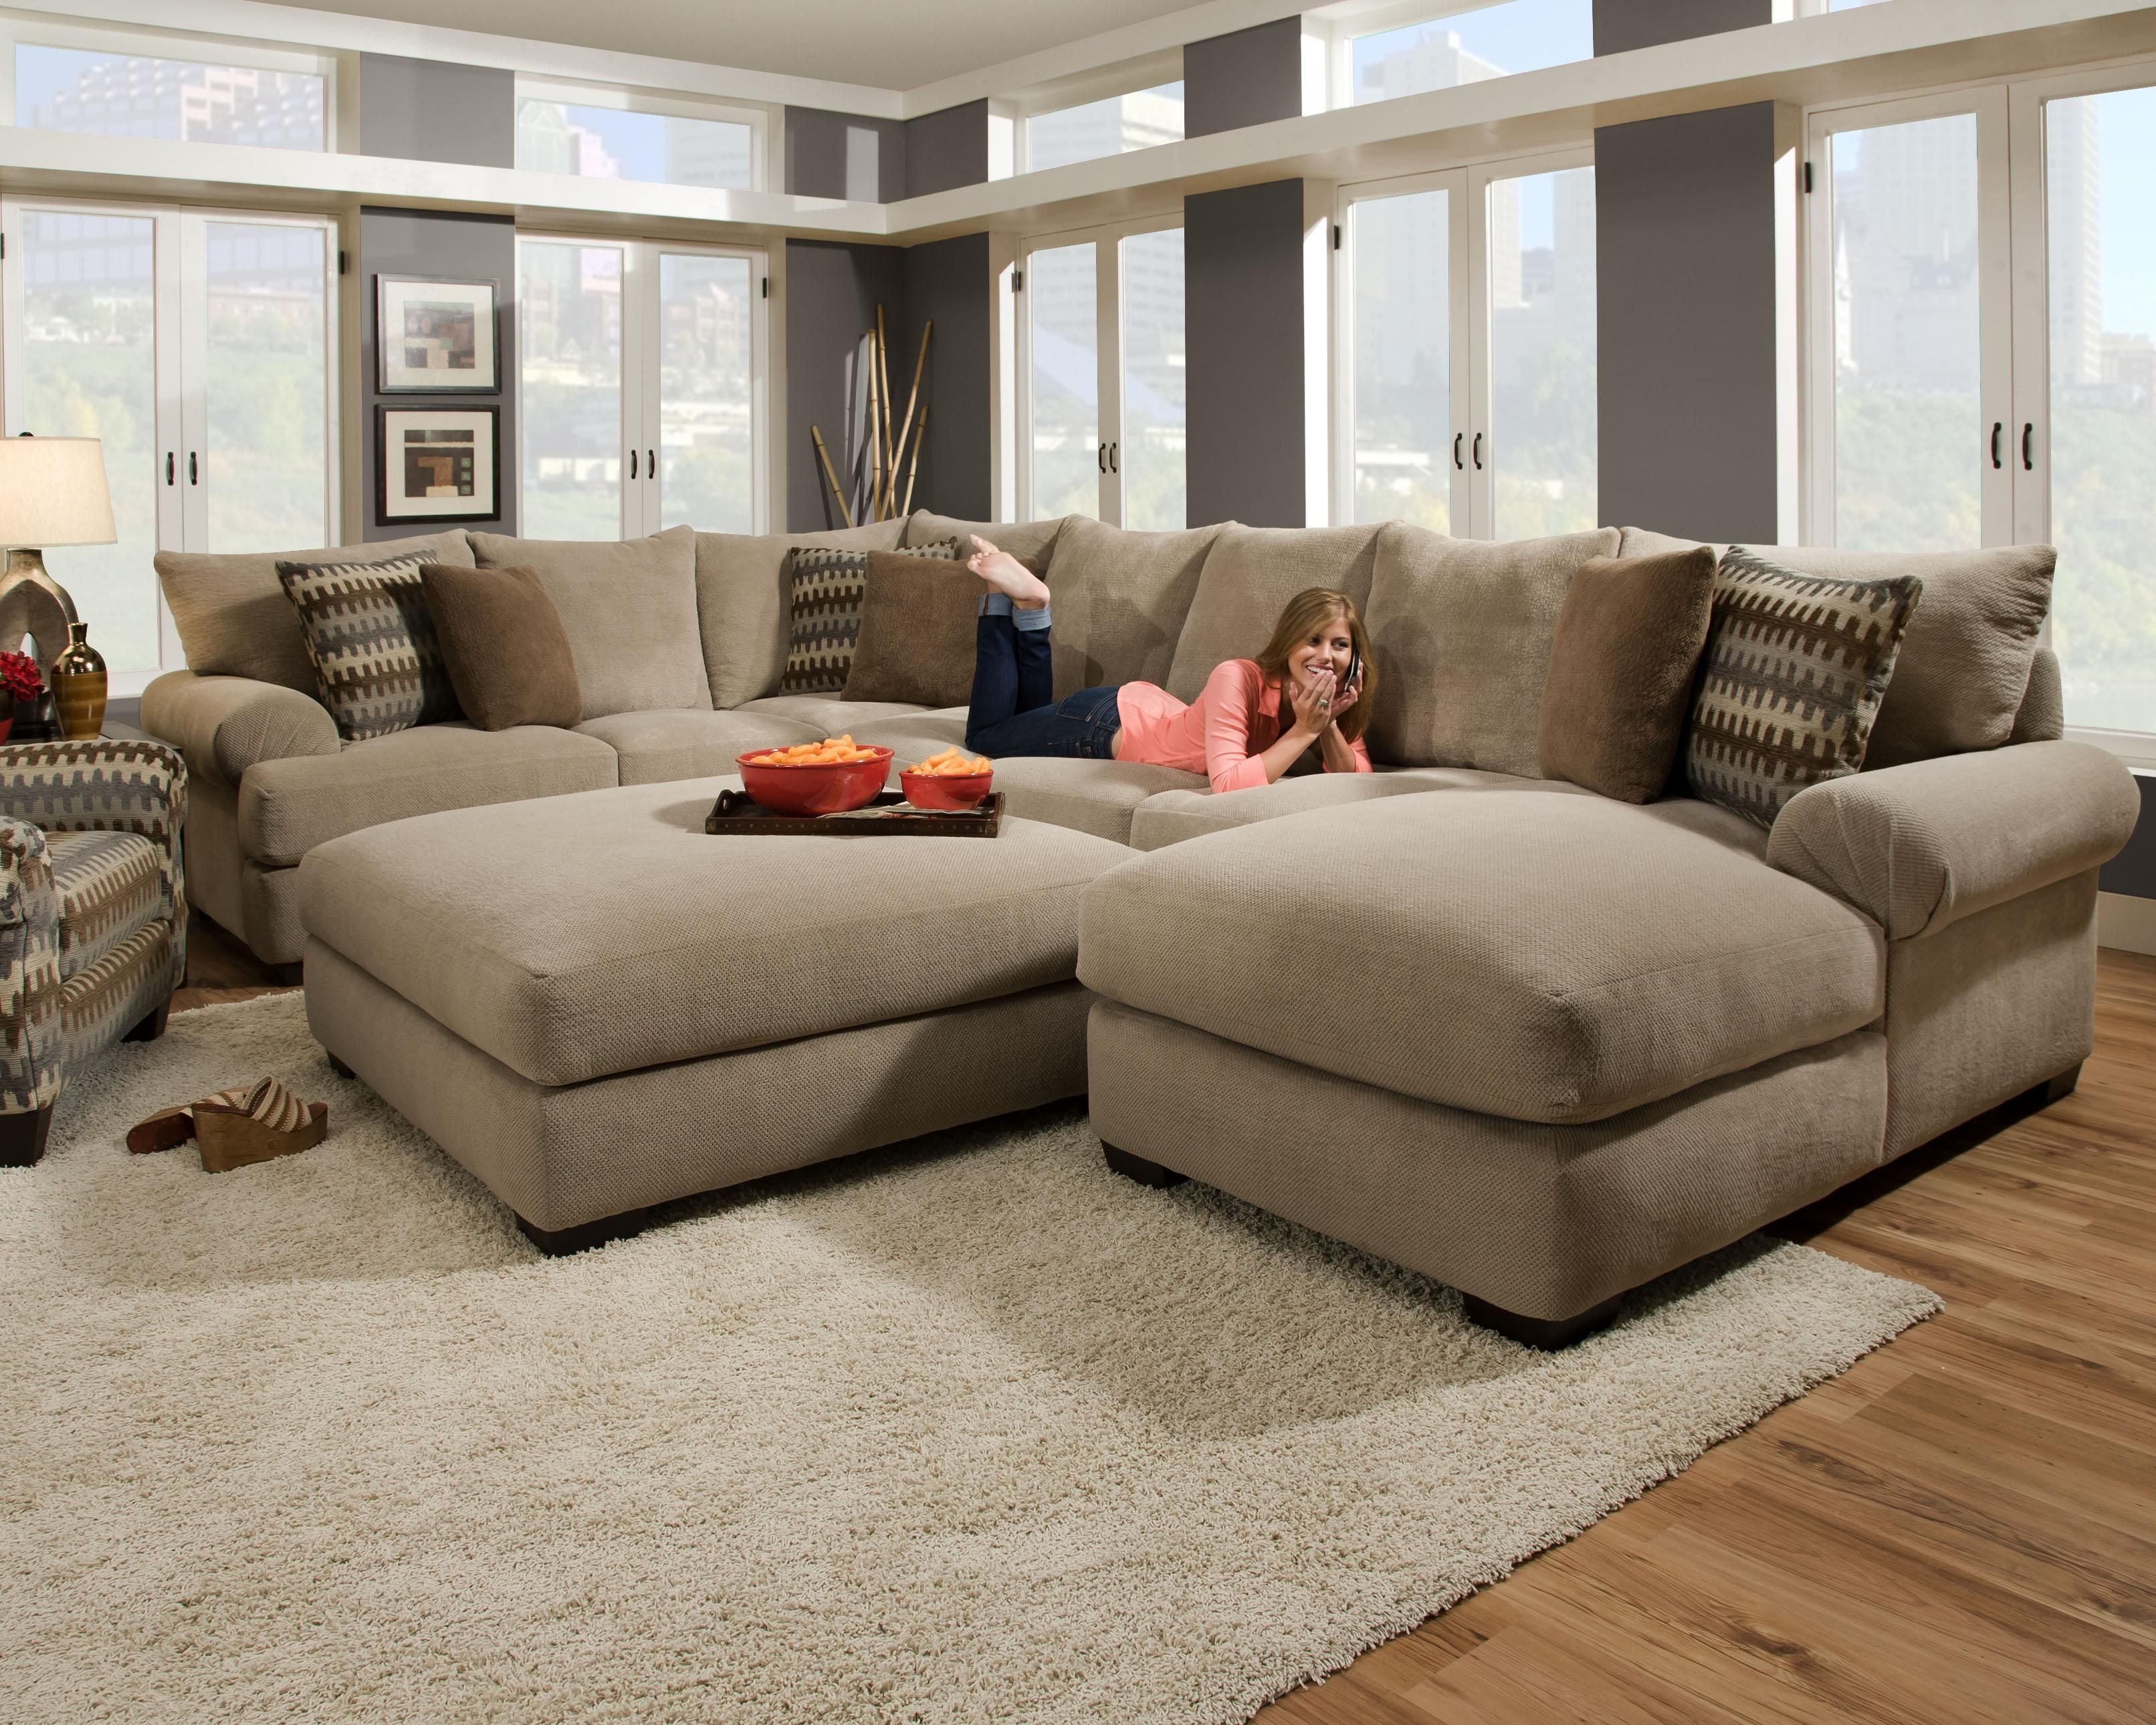 Furniture Design Idea For Living Room And Oversized U Shaped Throughout Comfy Sectional Sofa (View 11 of 15)